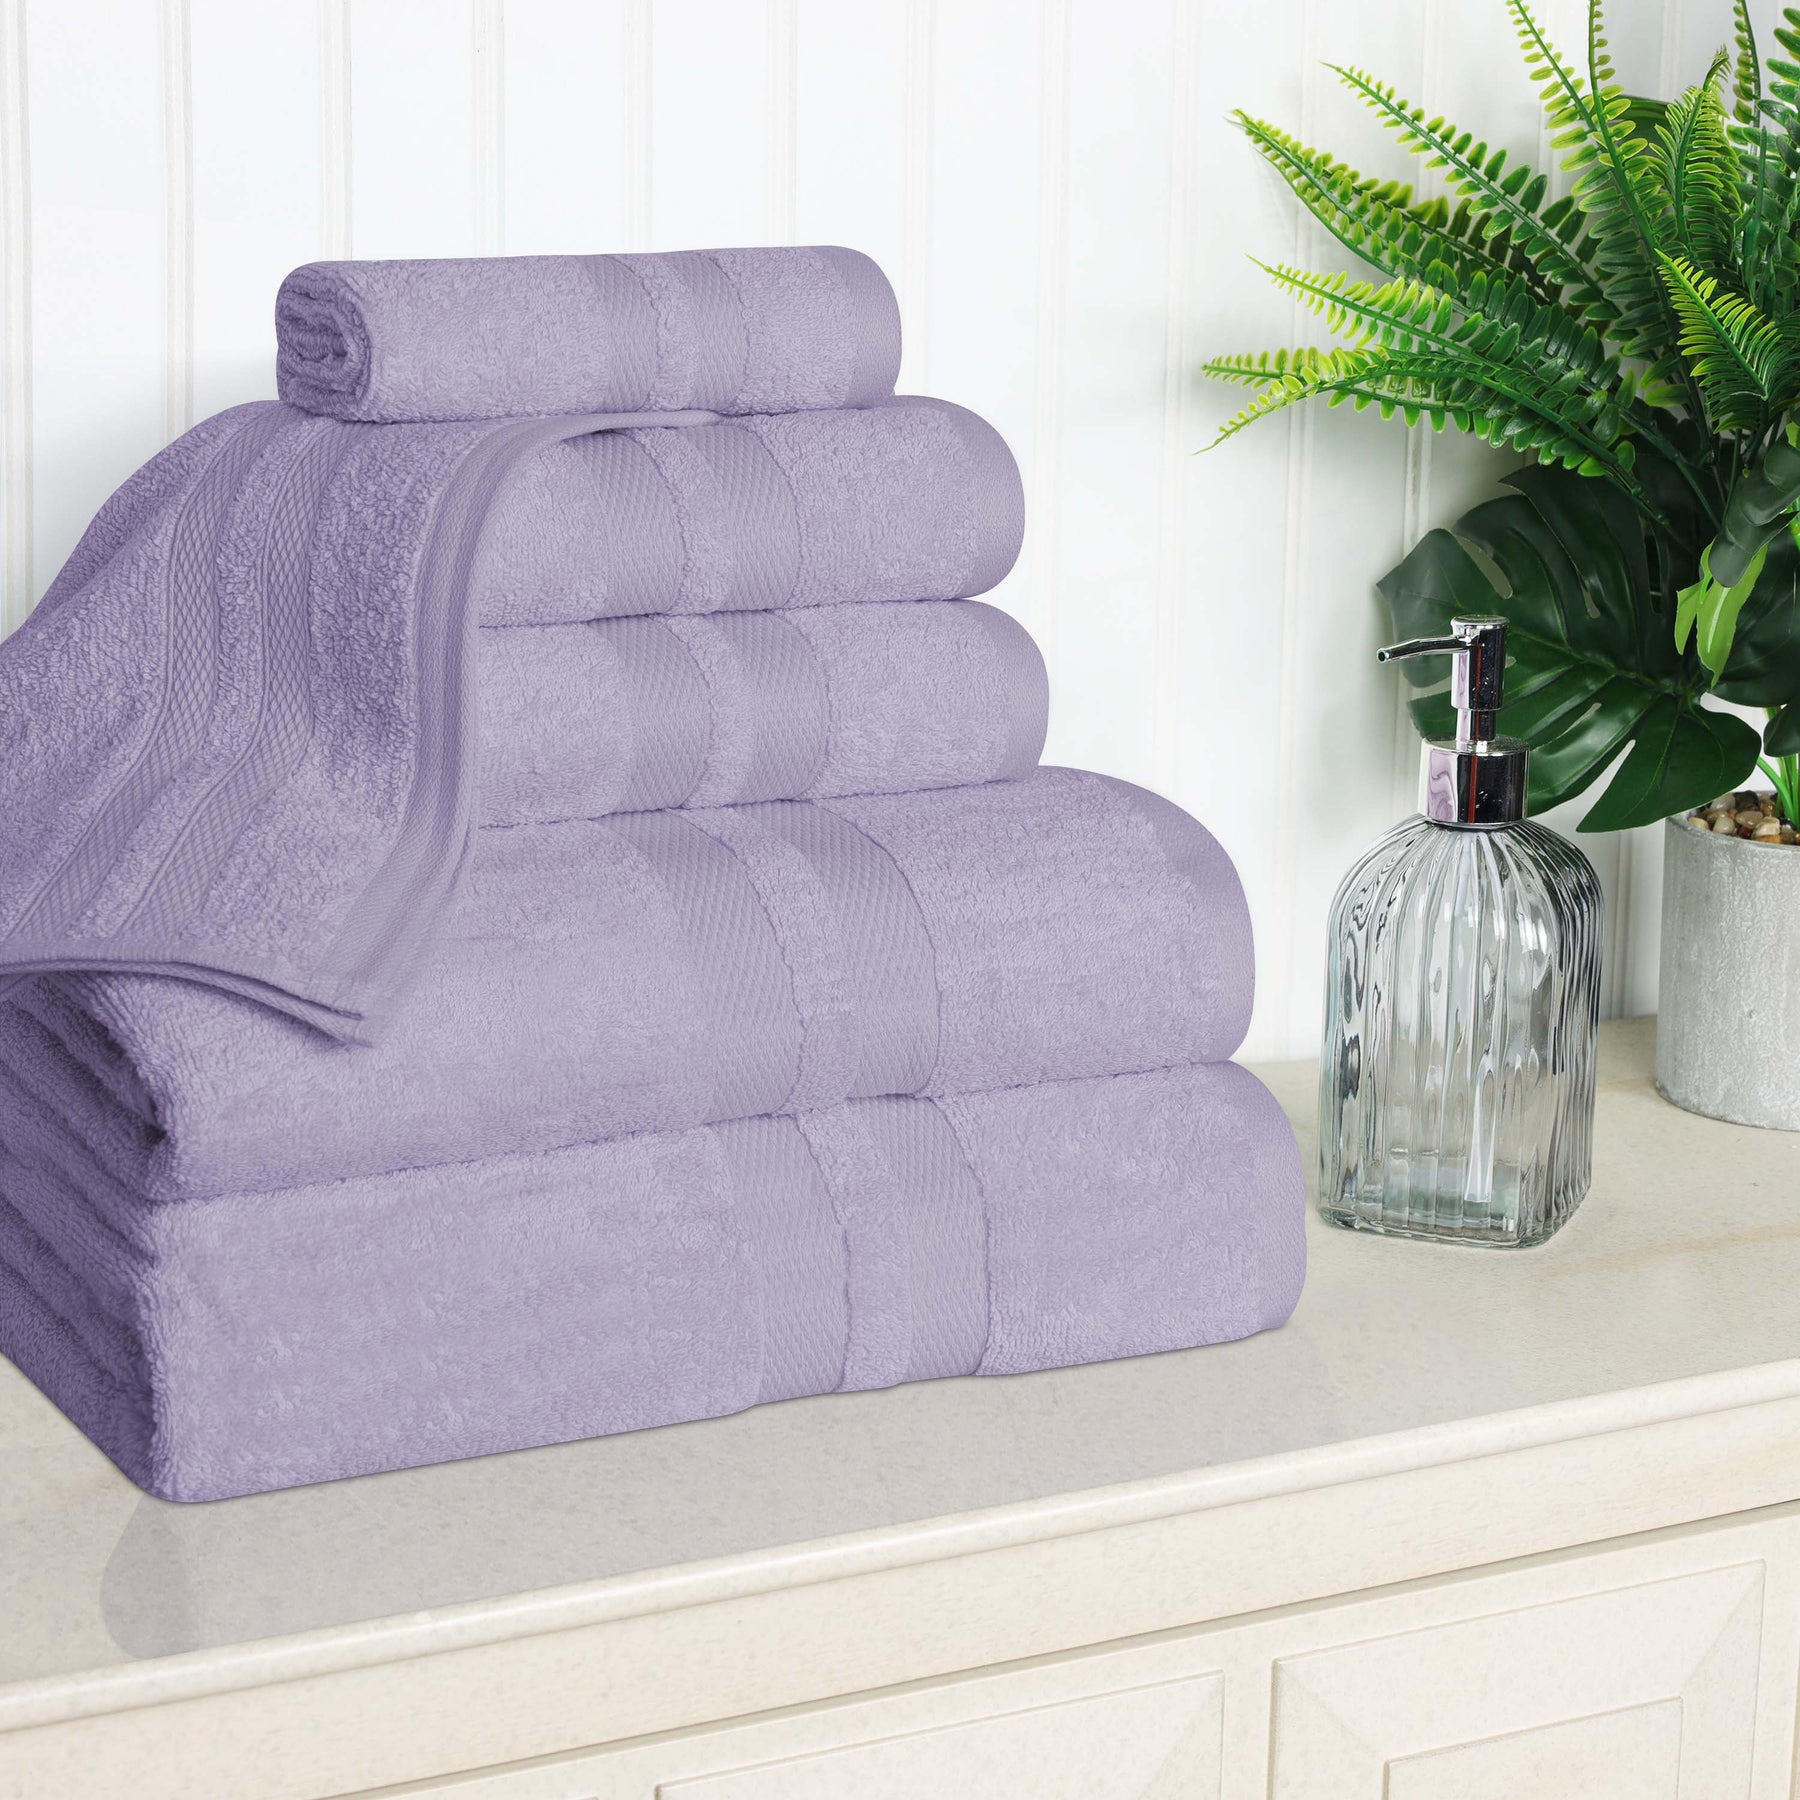 Superior Ultra Soft Cotton Absorbent Solid Assorted 6-Piece Towel Set - Wisteria